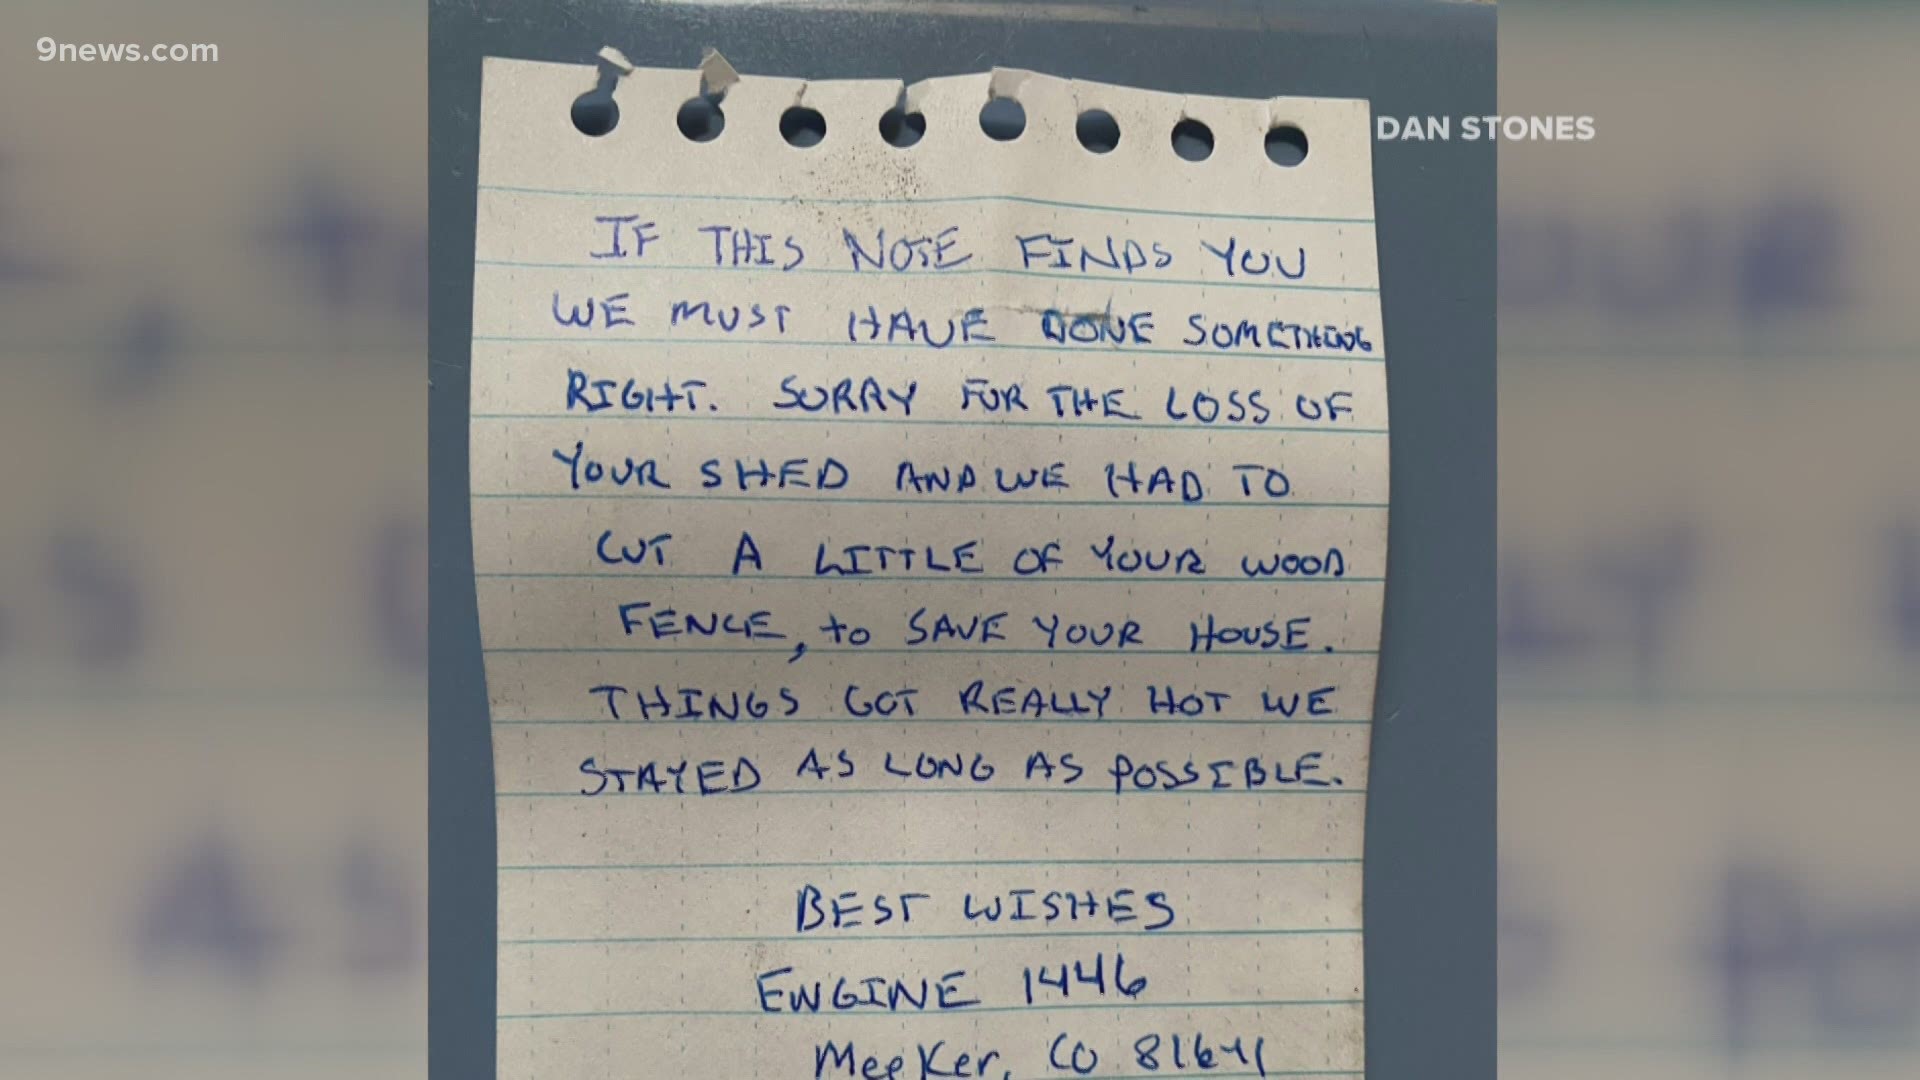 Firefighters working on the East Troublesome Fire leave a note apologizing to a homeowner for damaging his fence in order to save his house.